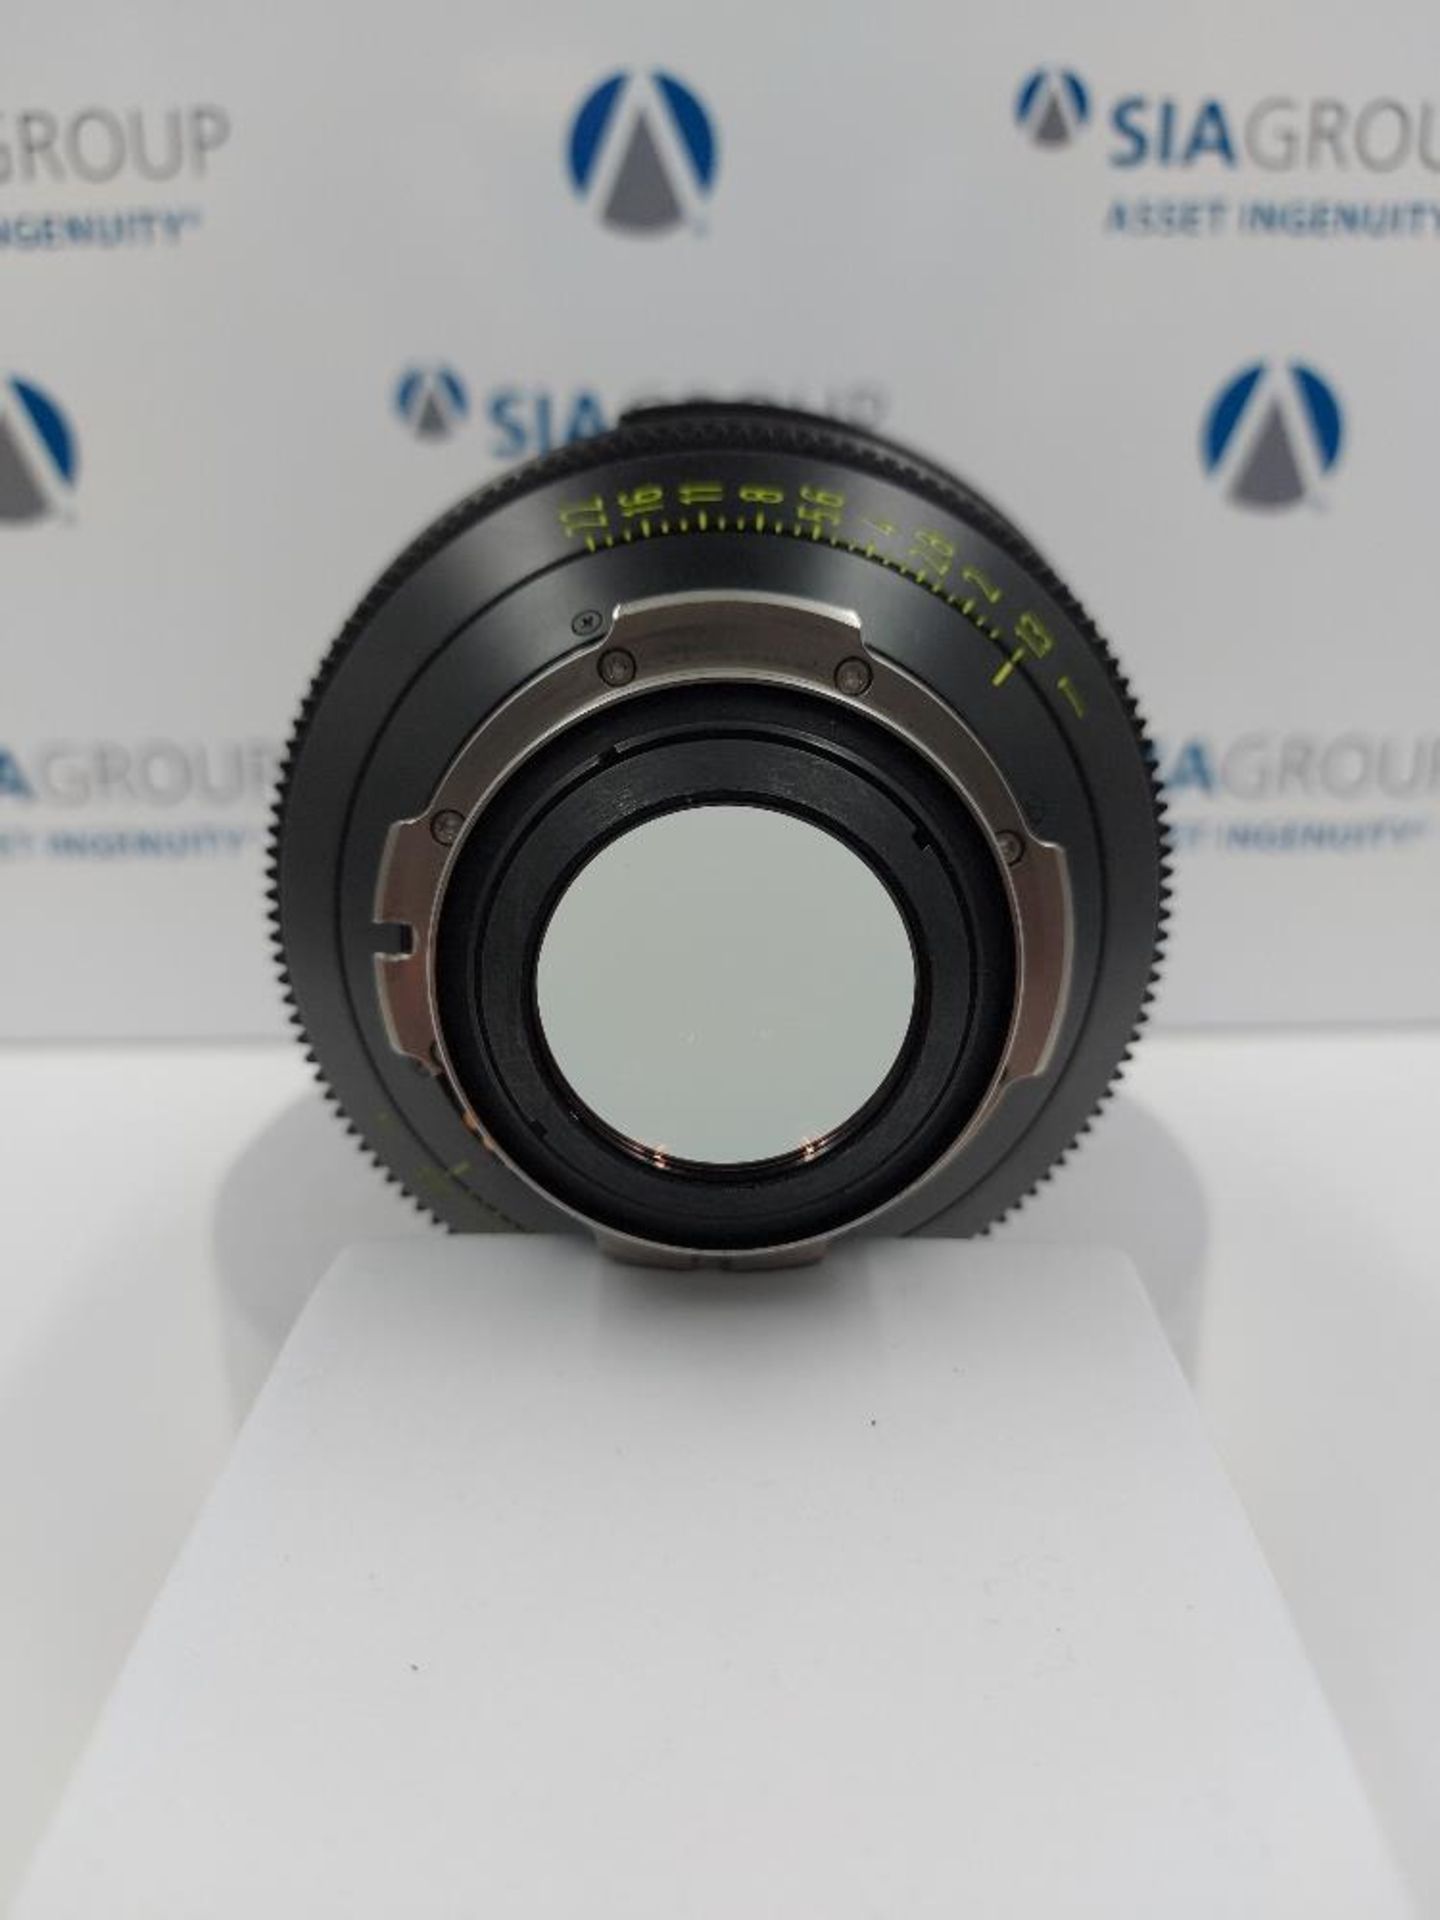 Zeiss ARRI Master Prime 135mm T1.3 Lens with PL Mount - Image 6 of 6